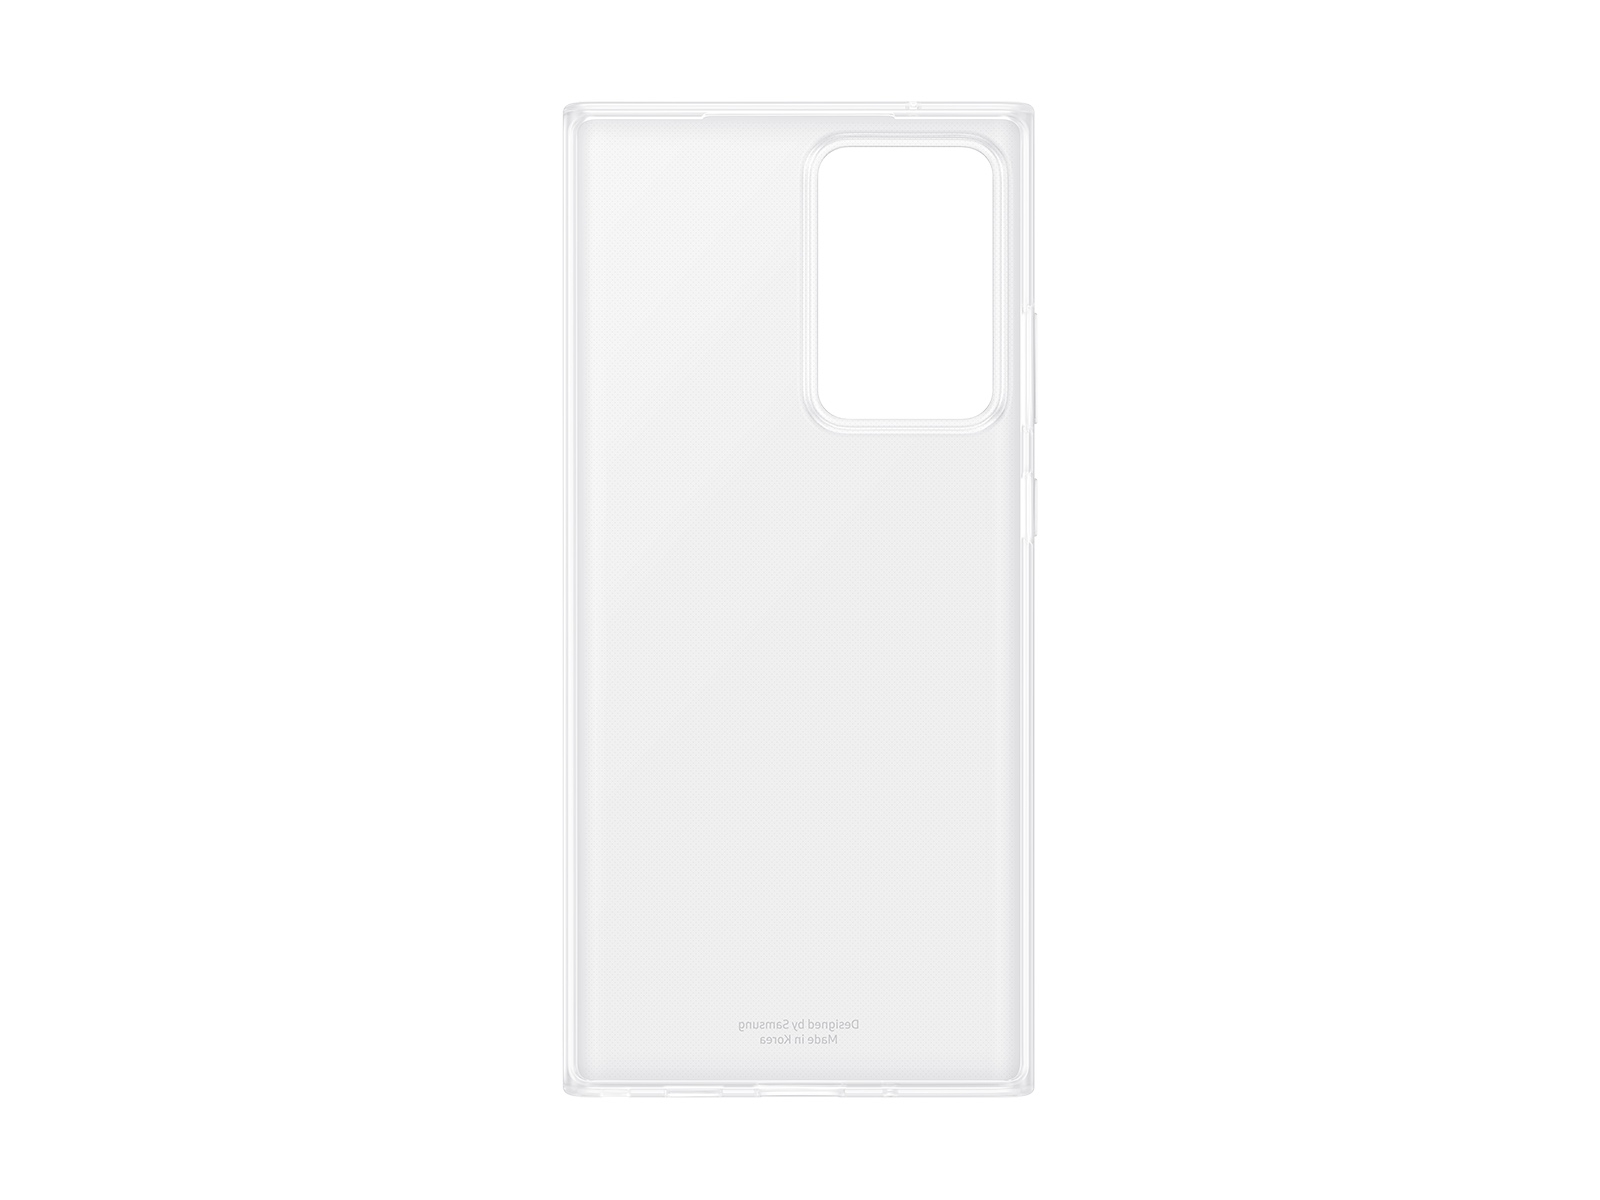 Clear Case for Galaxy Note 20 and Note 20 Ultra Soft Transparent Cover —  Shamo's